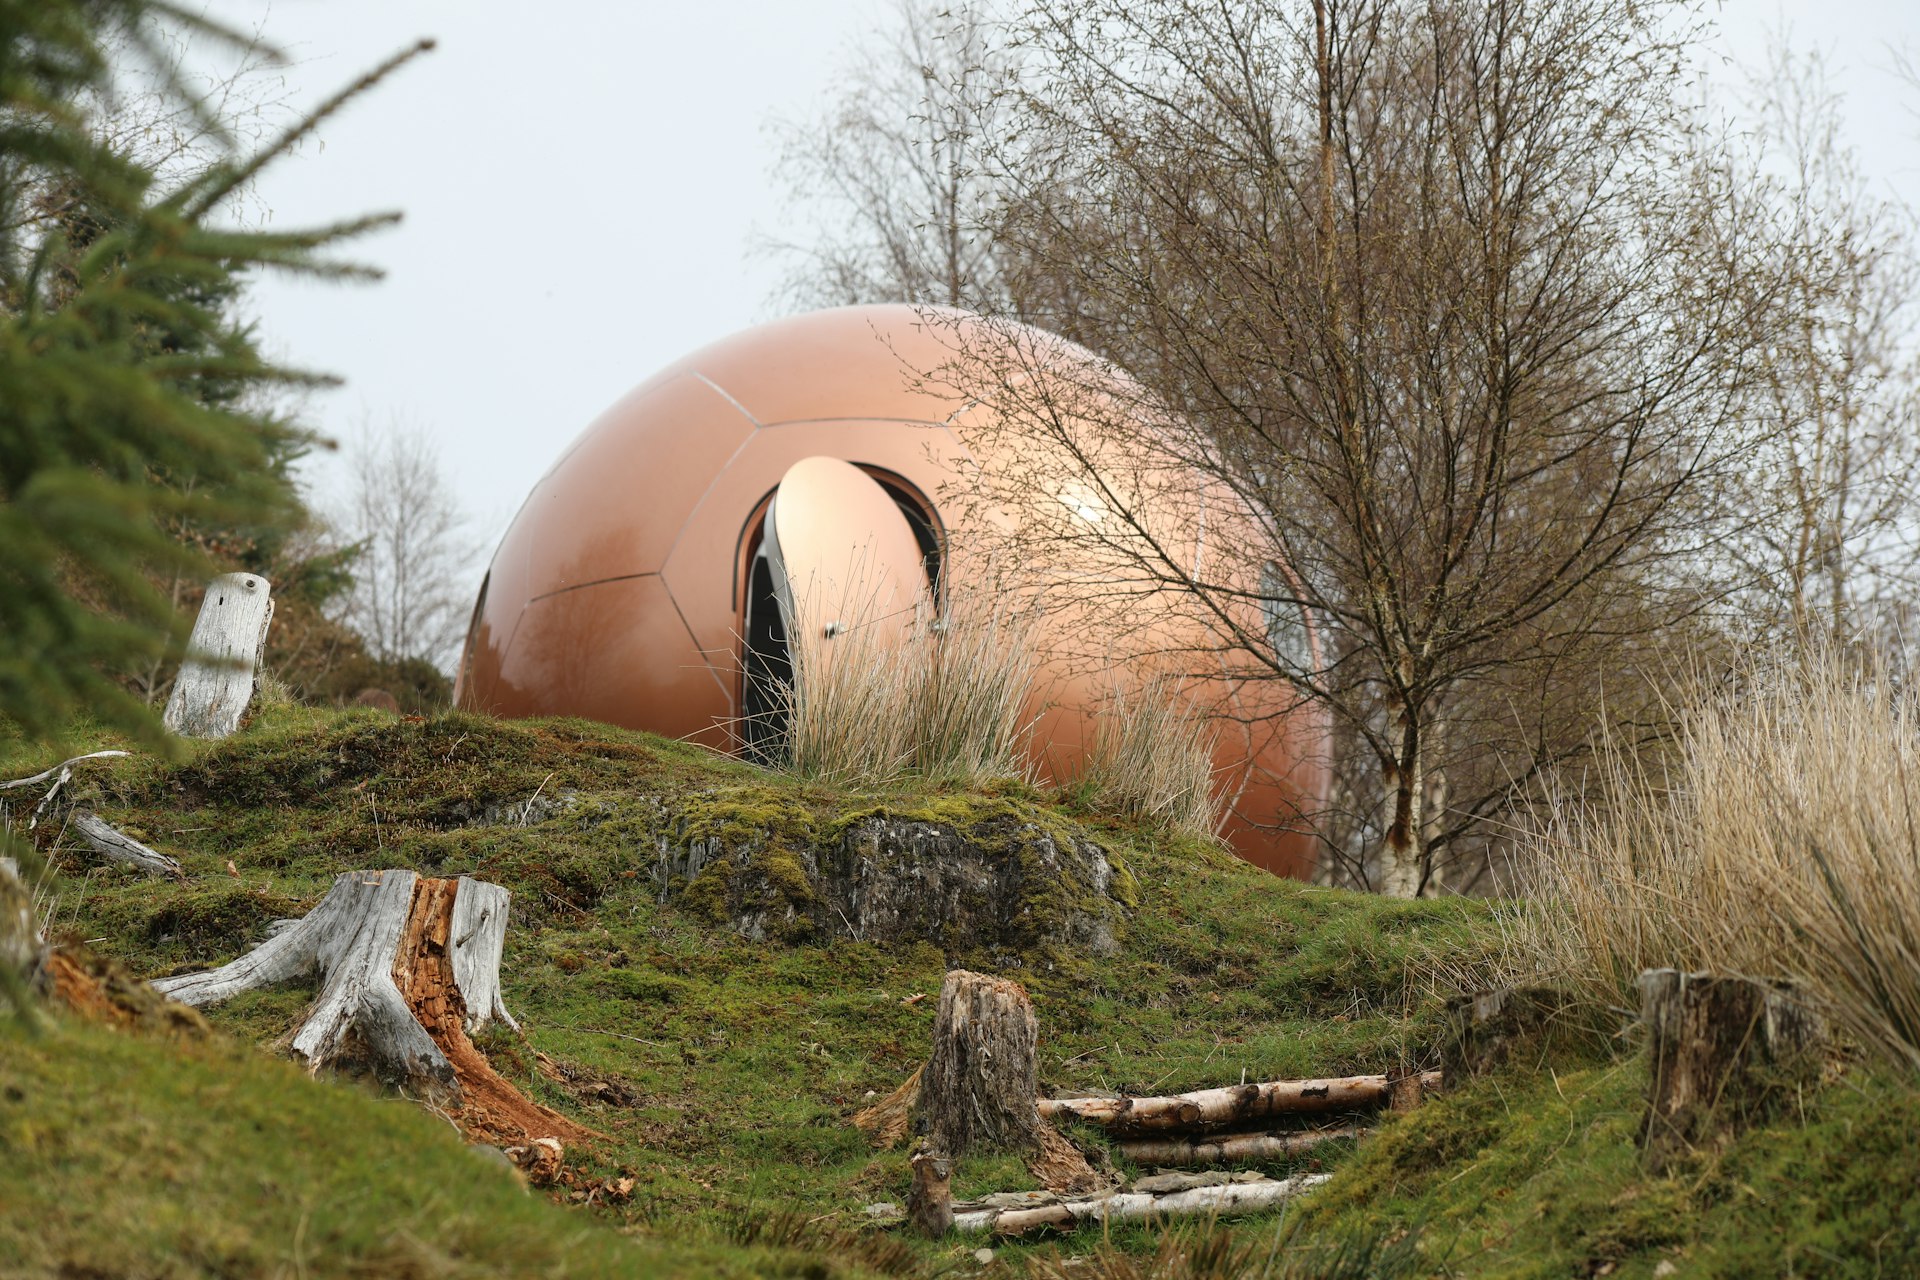 A spherical copper-colored hut tucked among trees